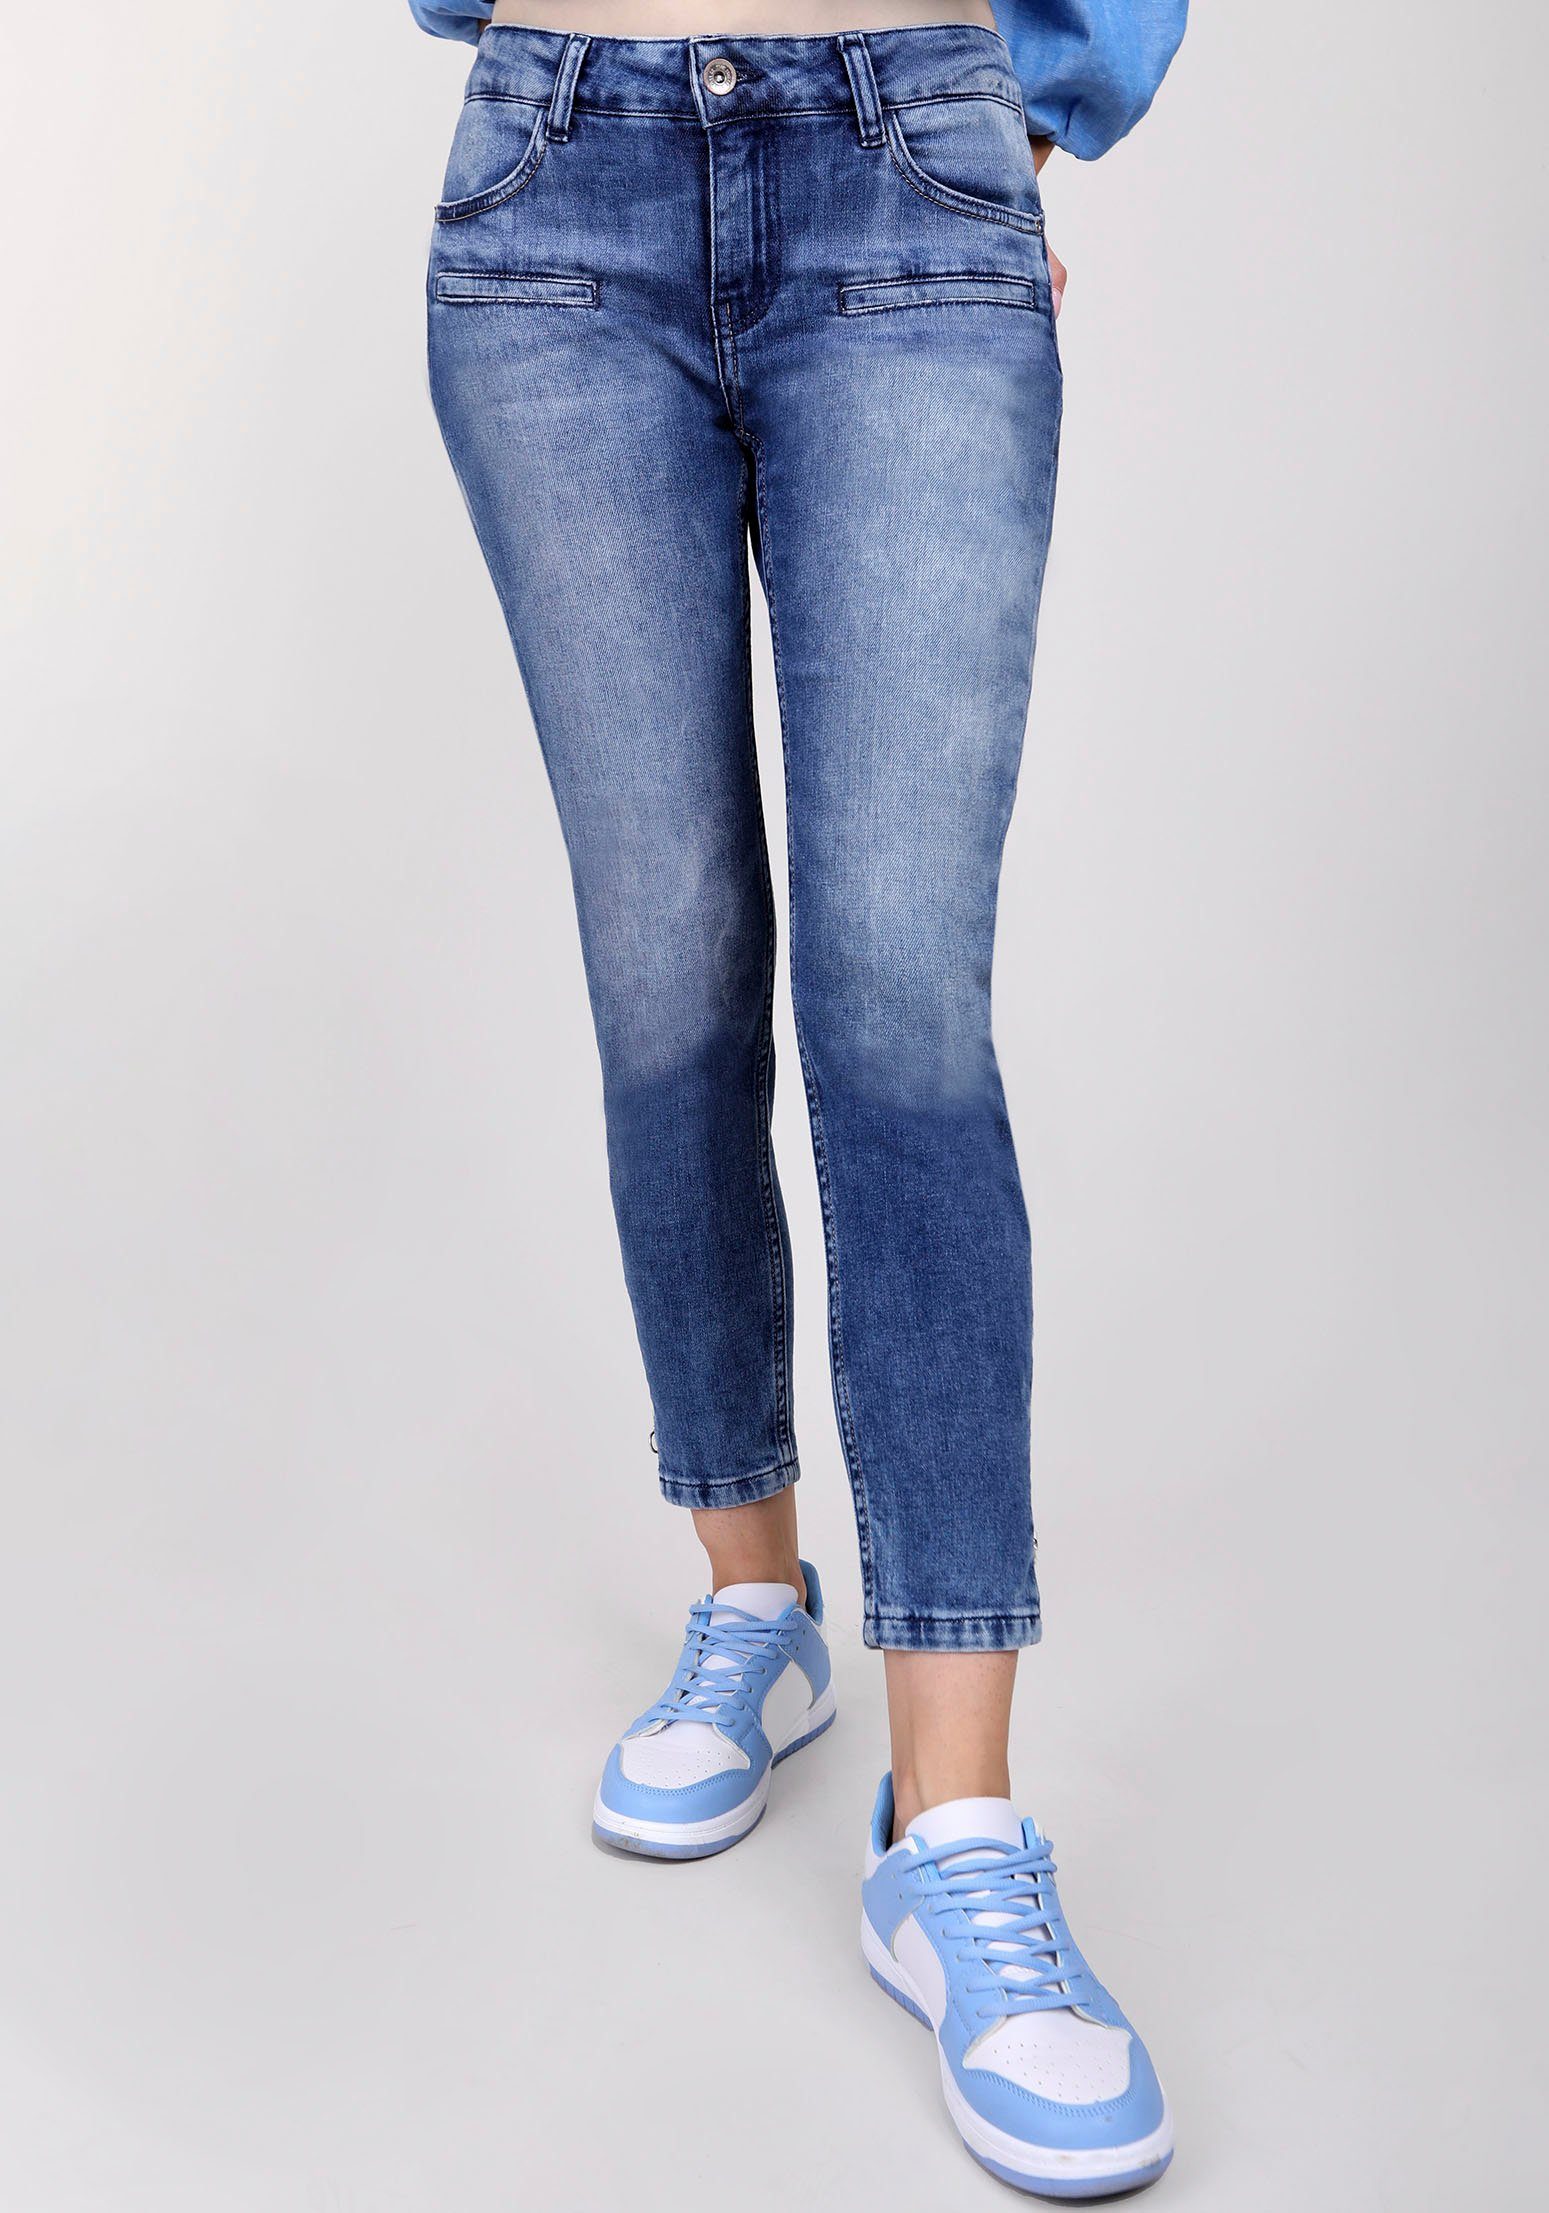 BLUE FIRE Skinny-fit-Jeans ALICIA online kaufen | OTTO